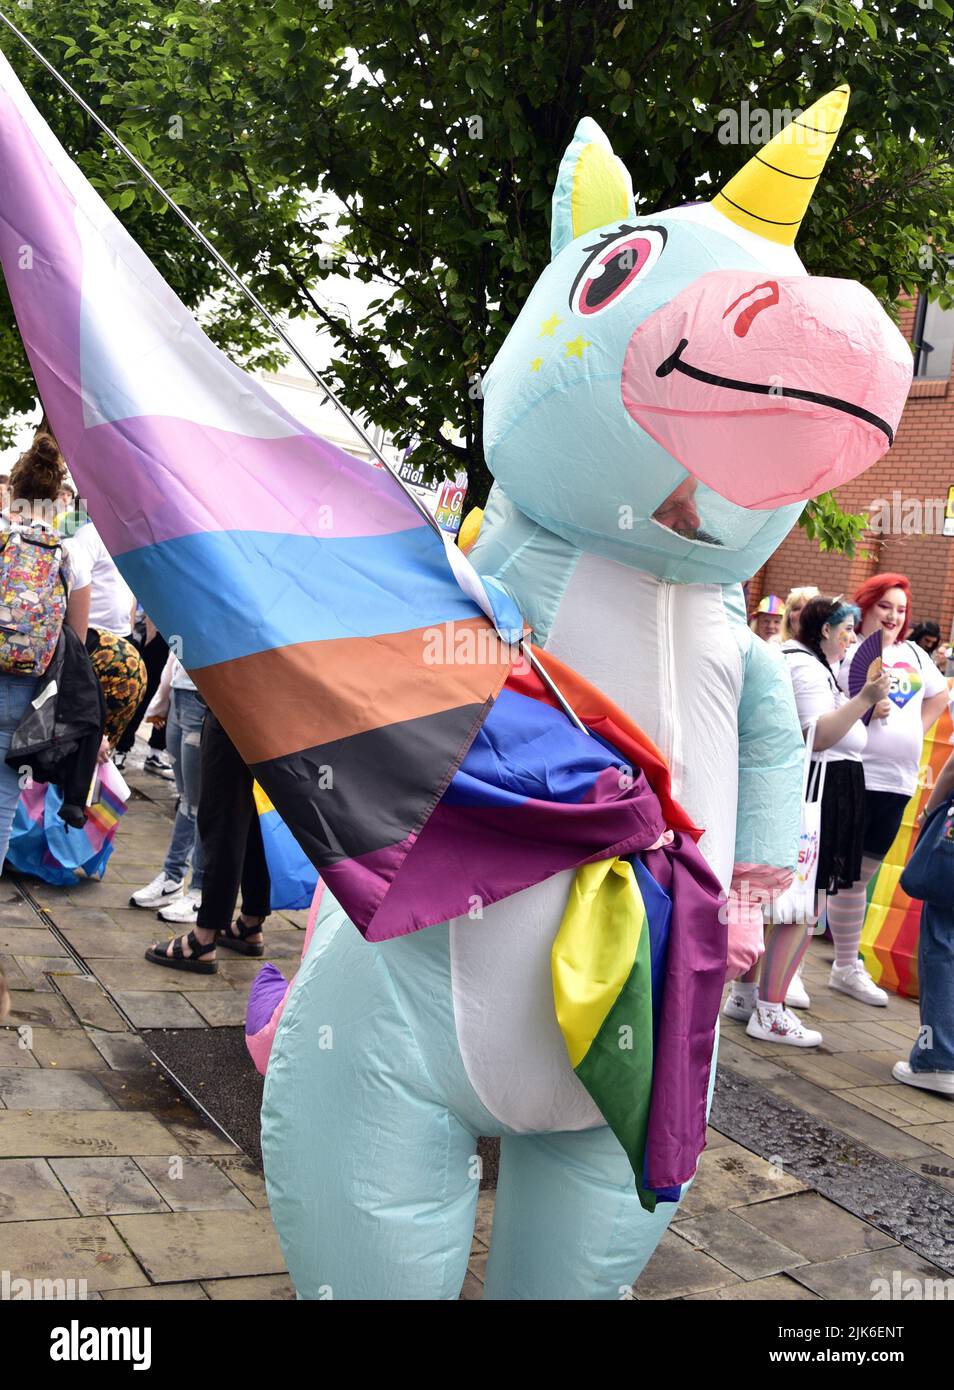 Stockport, UK, 31st July, 2022. A person in an inflatable unicorn costume carries a Freedom flag. Stockport LGBTQ+ Pride Parade in Stockport, Greater Manchester, England, United Kingdom, British Isles. Organisers say the parade is: 'Celebrating Stockport's LGBTQ+'. Community'. The parade marched from Bridgefield Street to Stockport's historic Market Place. Credit: Terry Waller/Alamy Live News Stock Photo